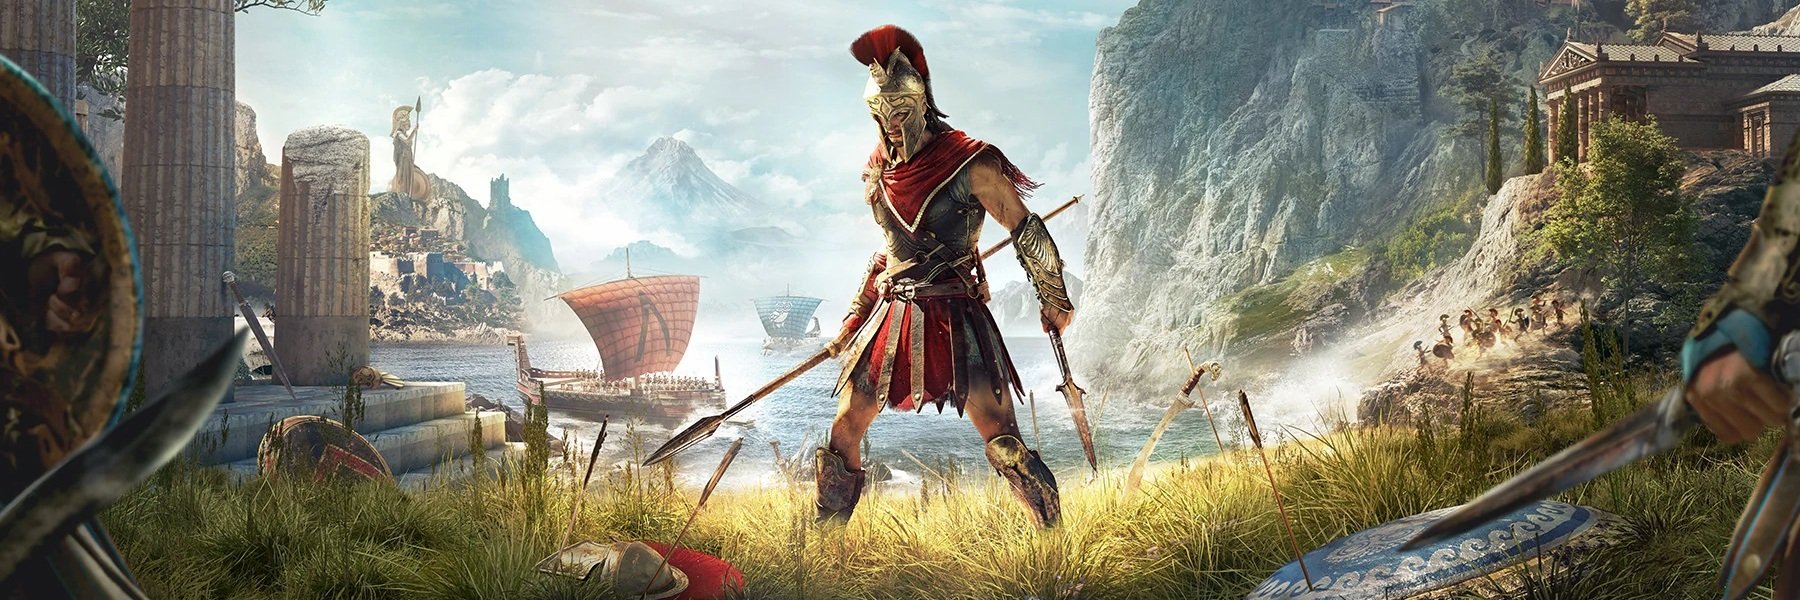 top 100 PC games: AC Odyssey